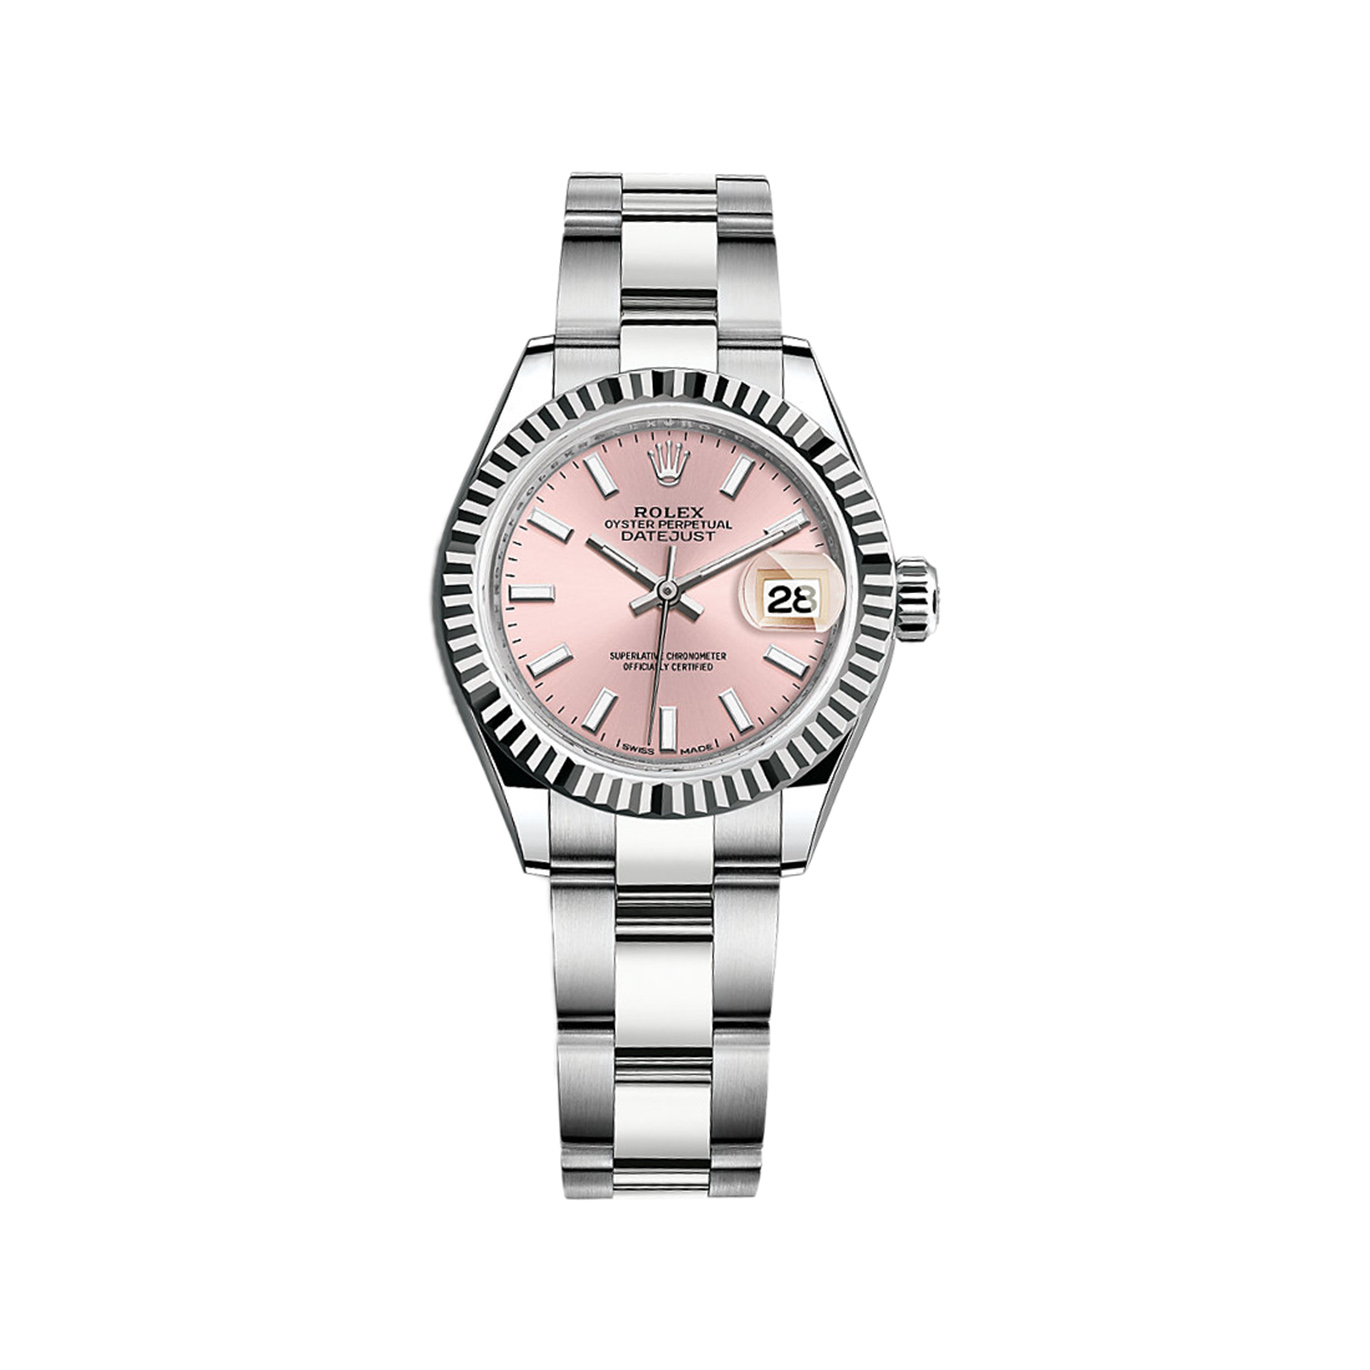 Lady-Datejust 28 279174 White Gold & Stainless Steel Watch (Pink)